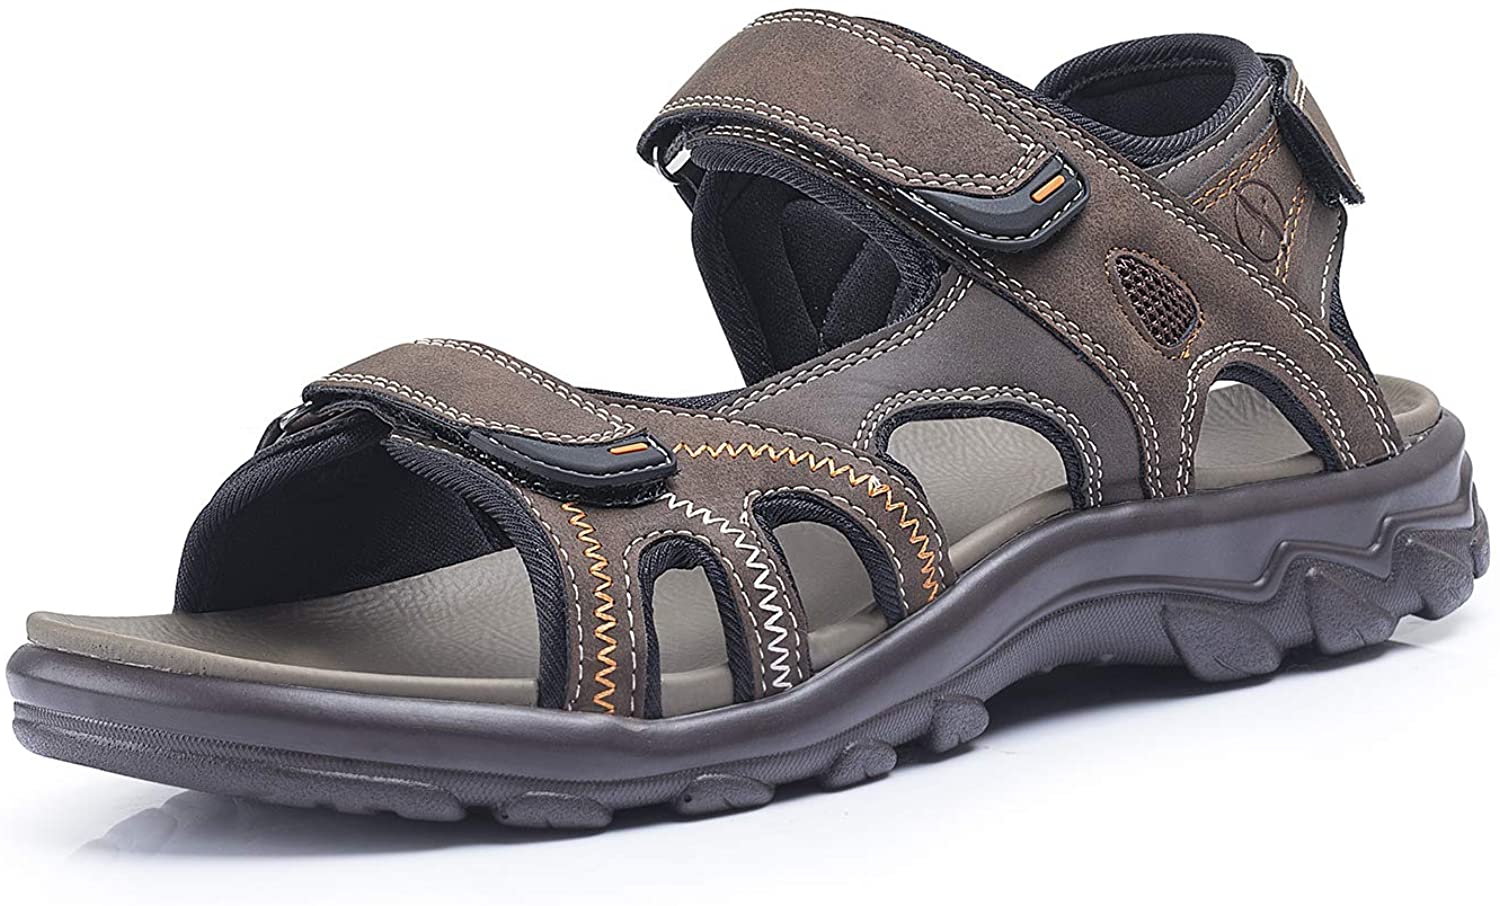 Adjustable Straps with Arch Support Open Toe for Outdoors Size 7-13 Men/Women's Sandals 